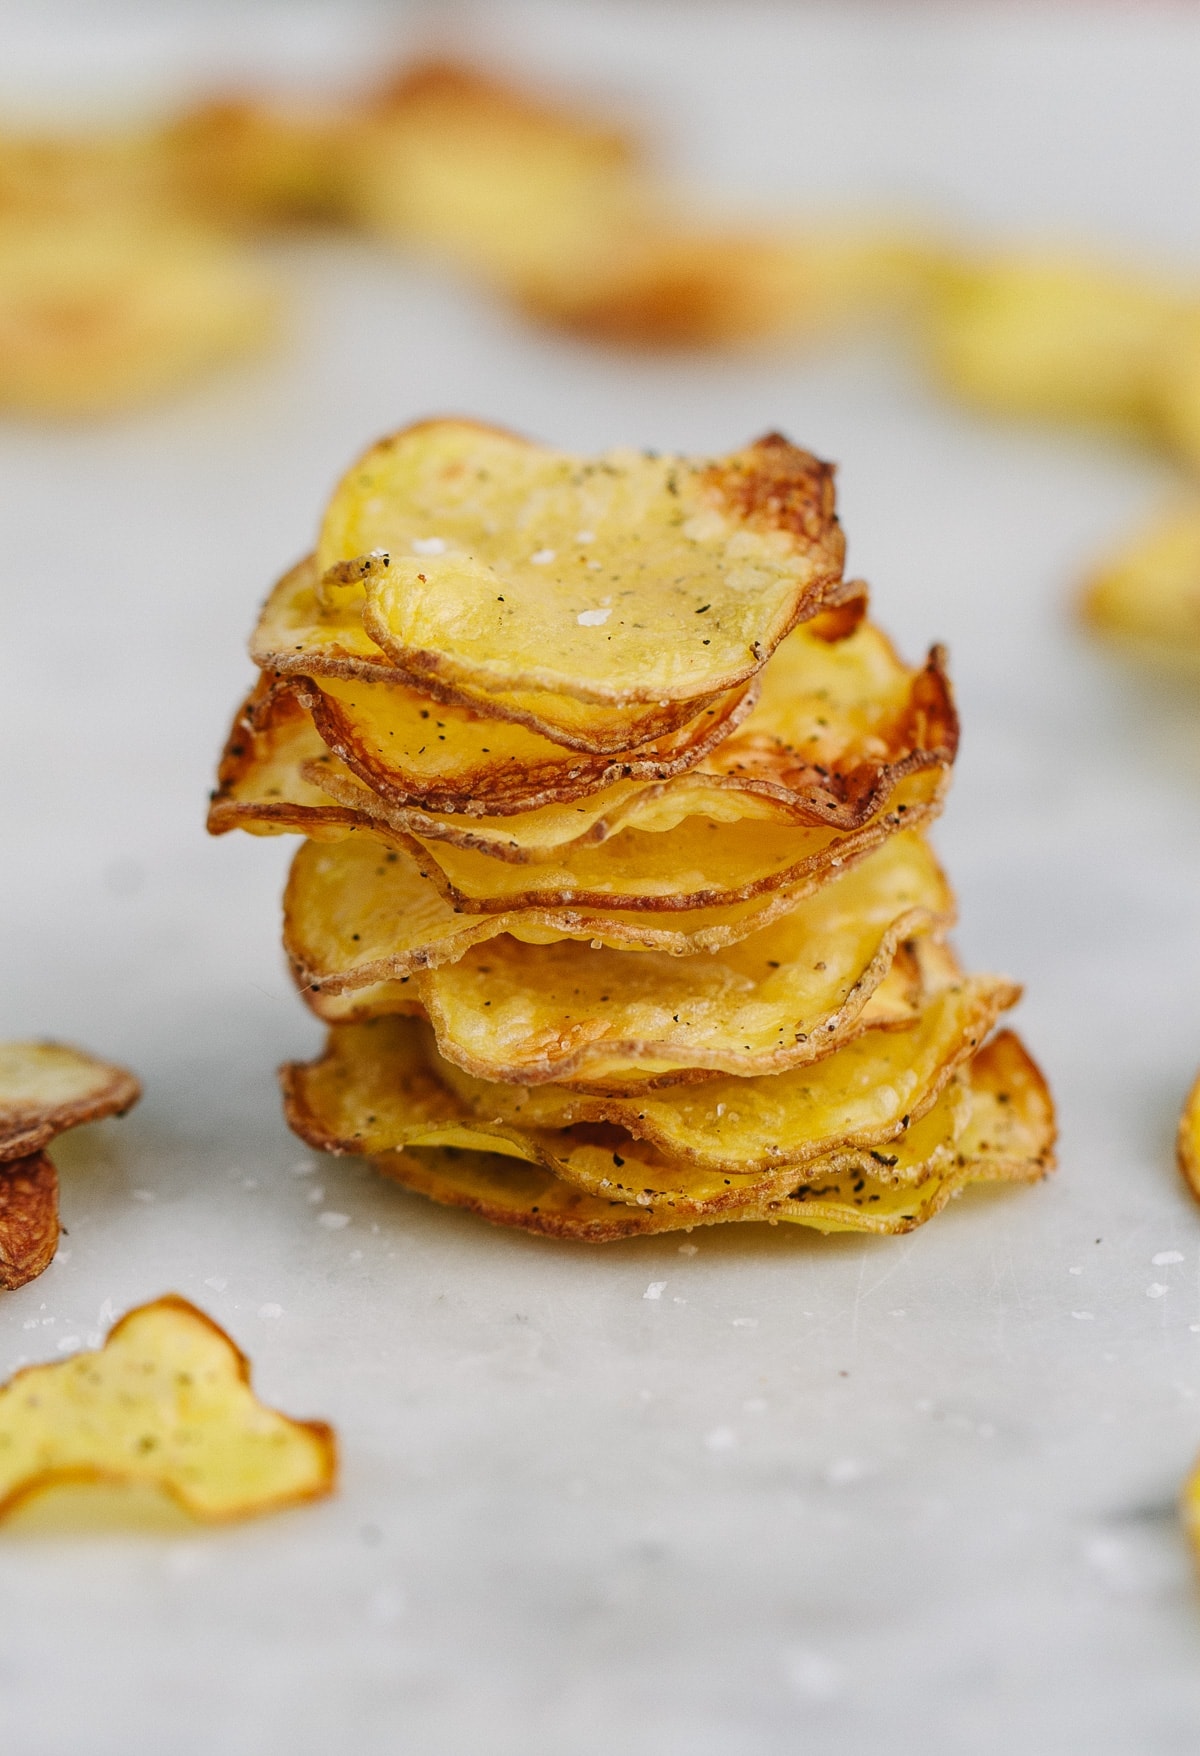 Homemade Salt and Vinegar Chips - Served From Scratch